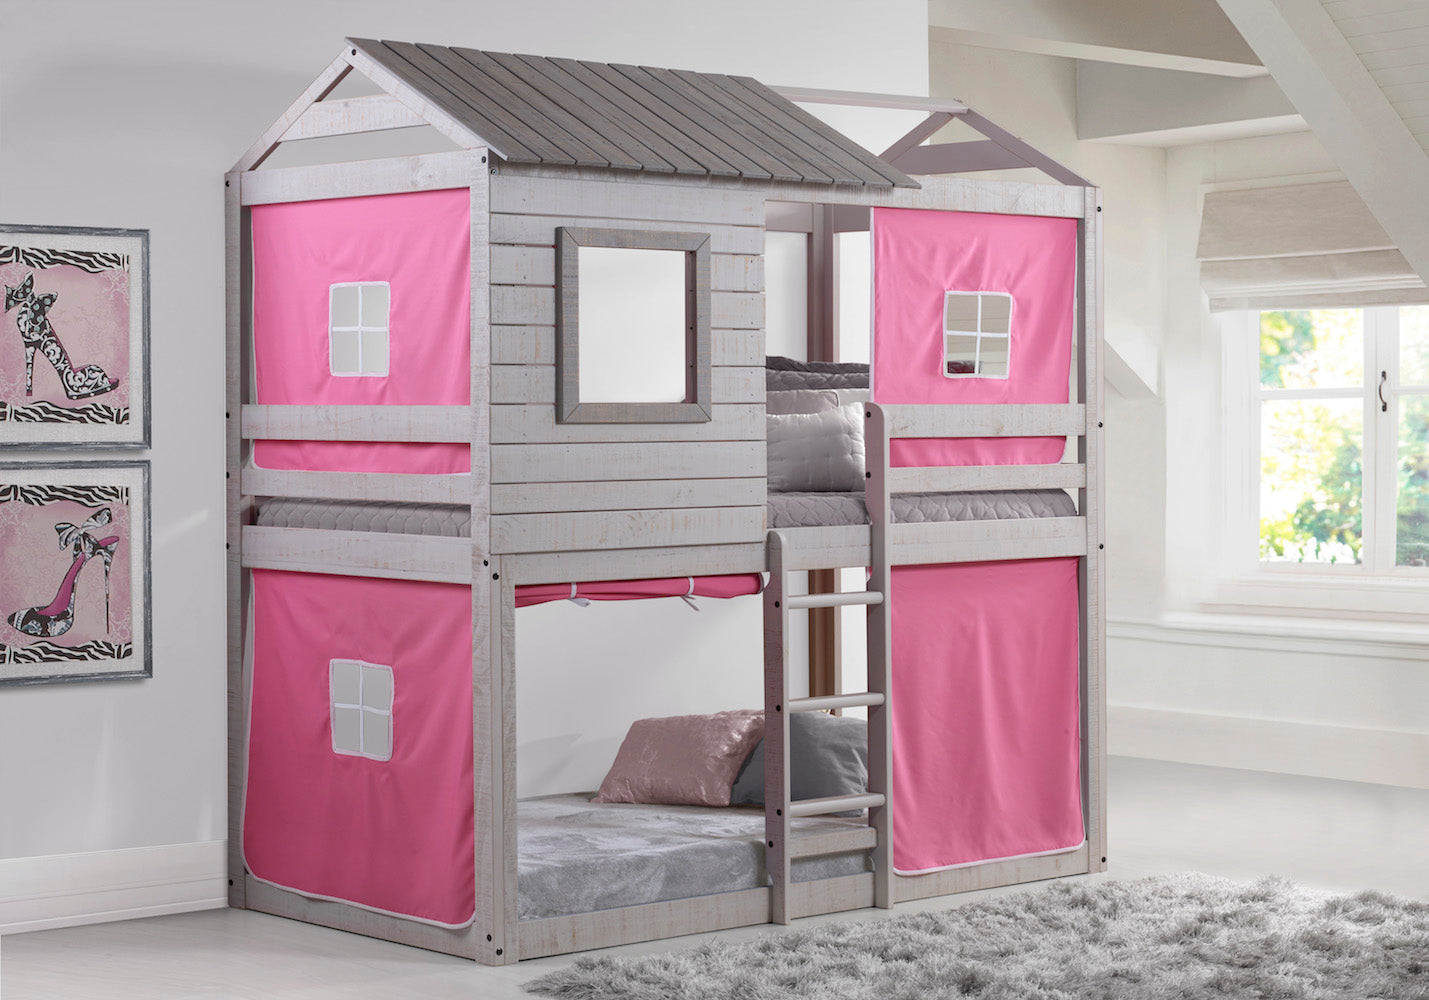 WEEKLY or MONTHLY. Hey Deer Blink Bunk Loft with Pink Tent